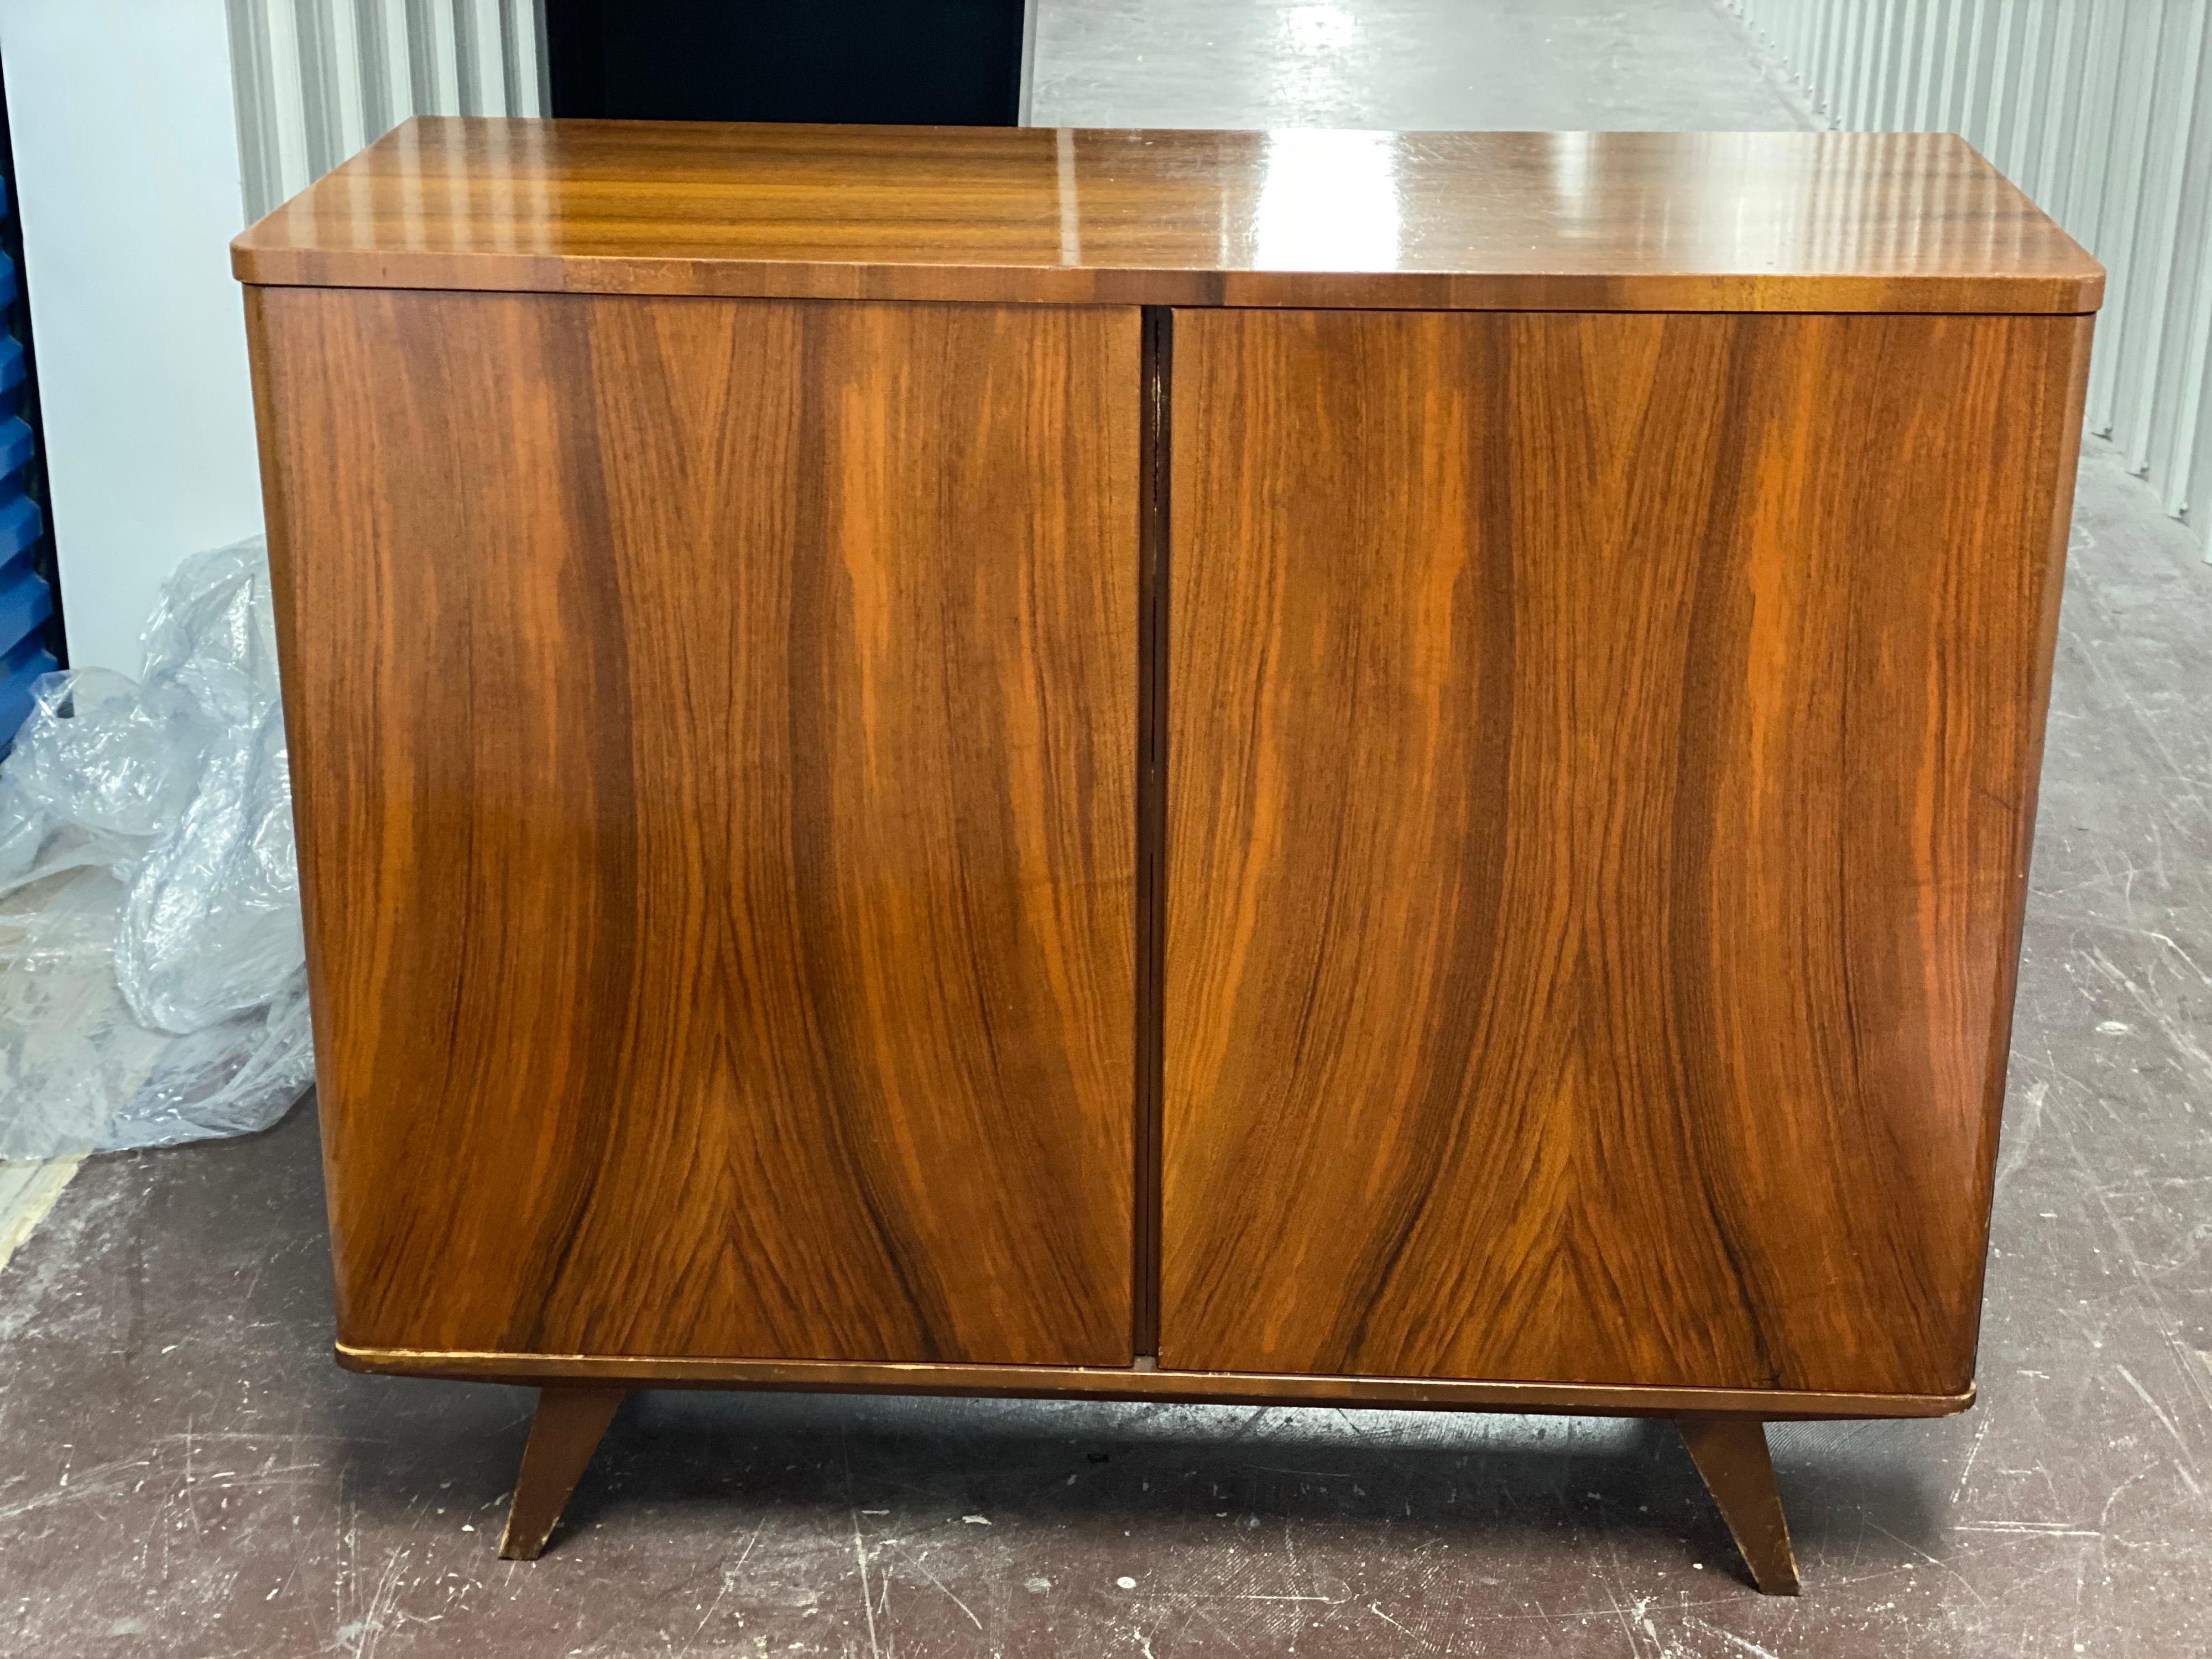 Mid-Century Modern Swedish cabinet
Beautifully designed rectangular piece with rounded edges. Two doors open to a beech wood interior of drawers and shelves. Doors are cleverly designed with place to grip doors open without the need for hardware.